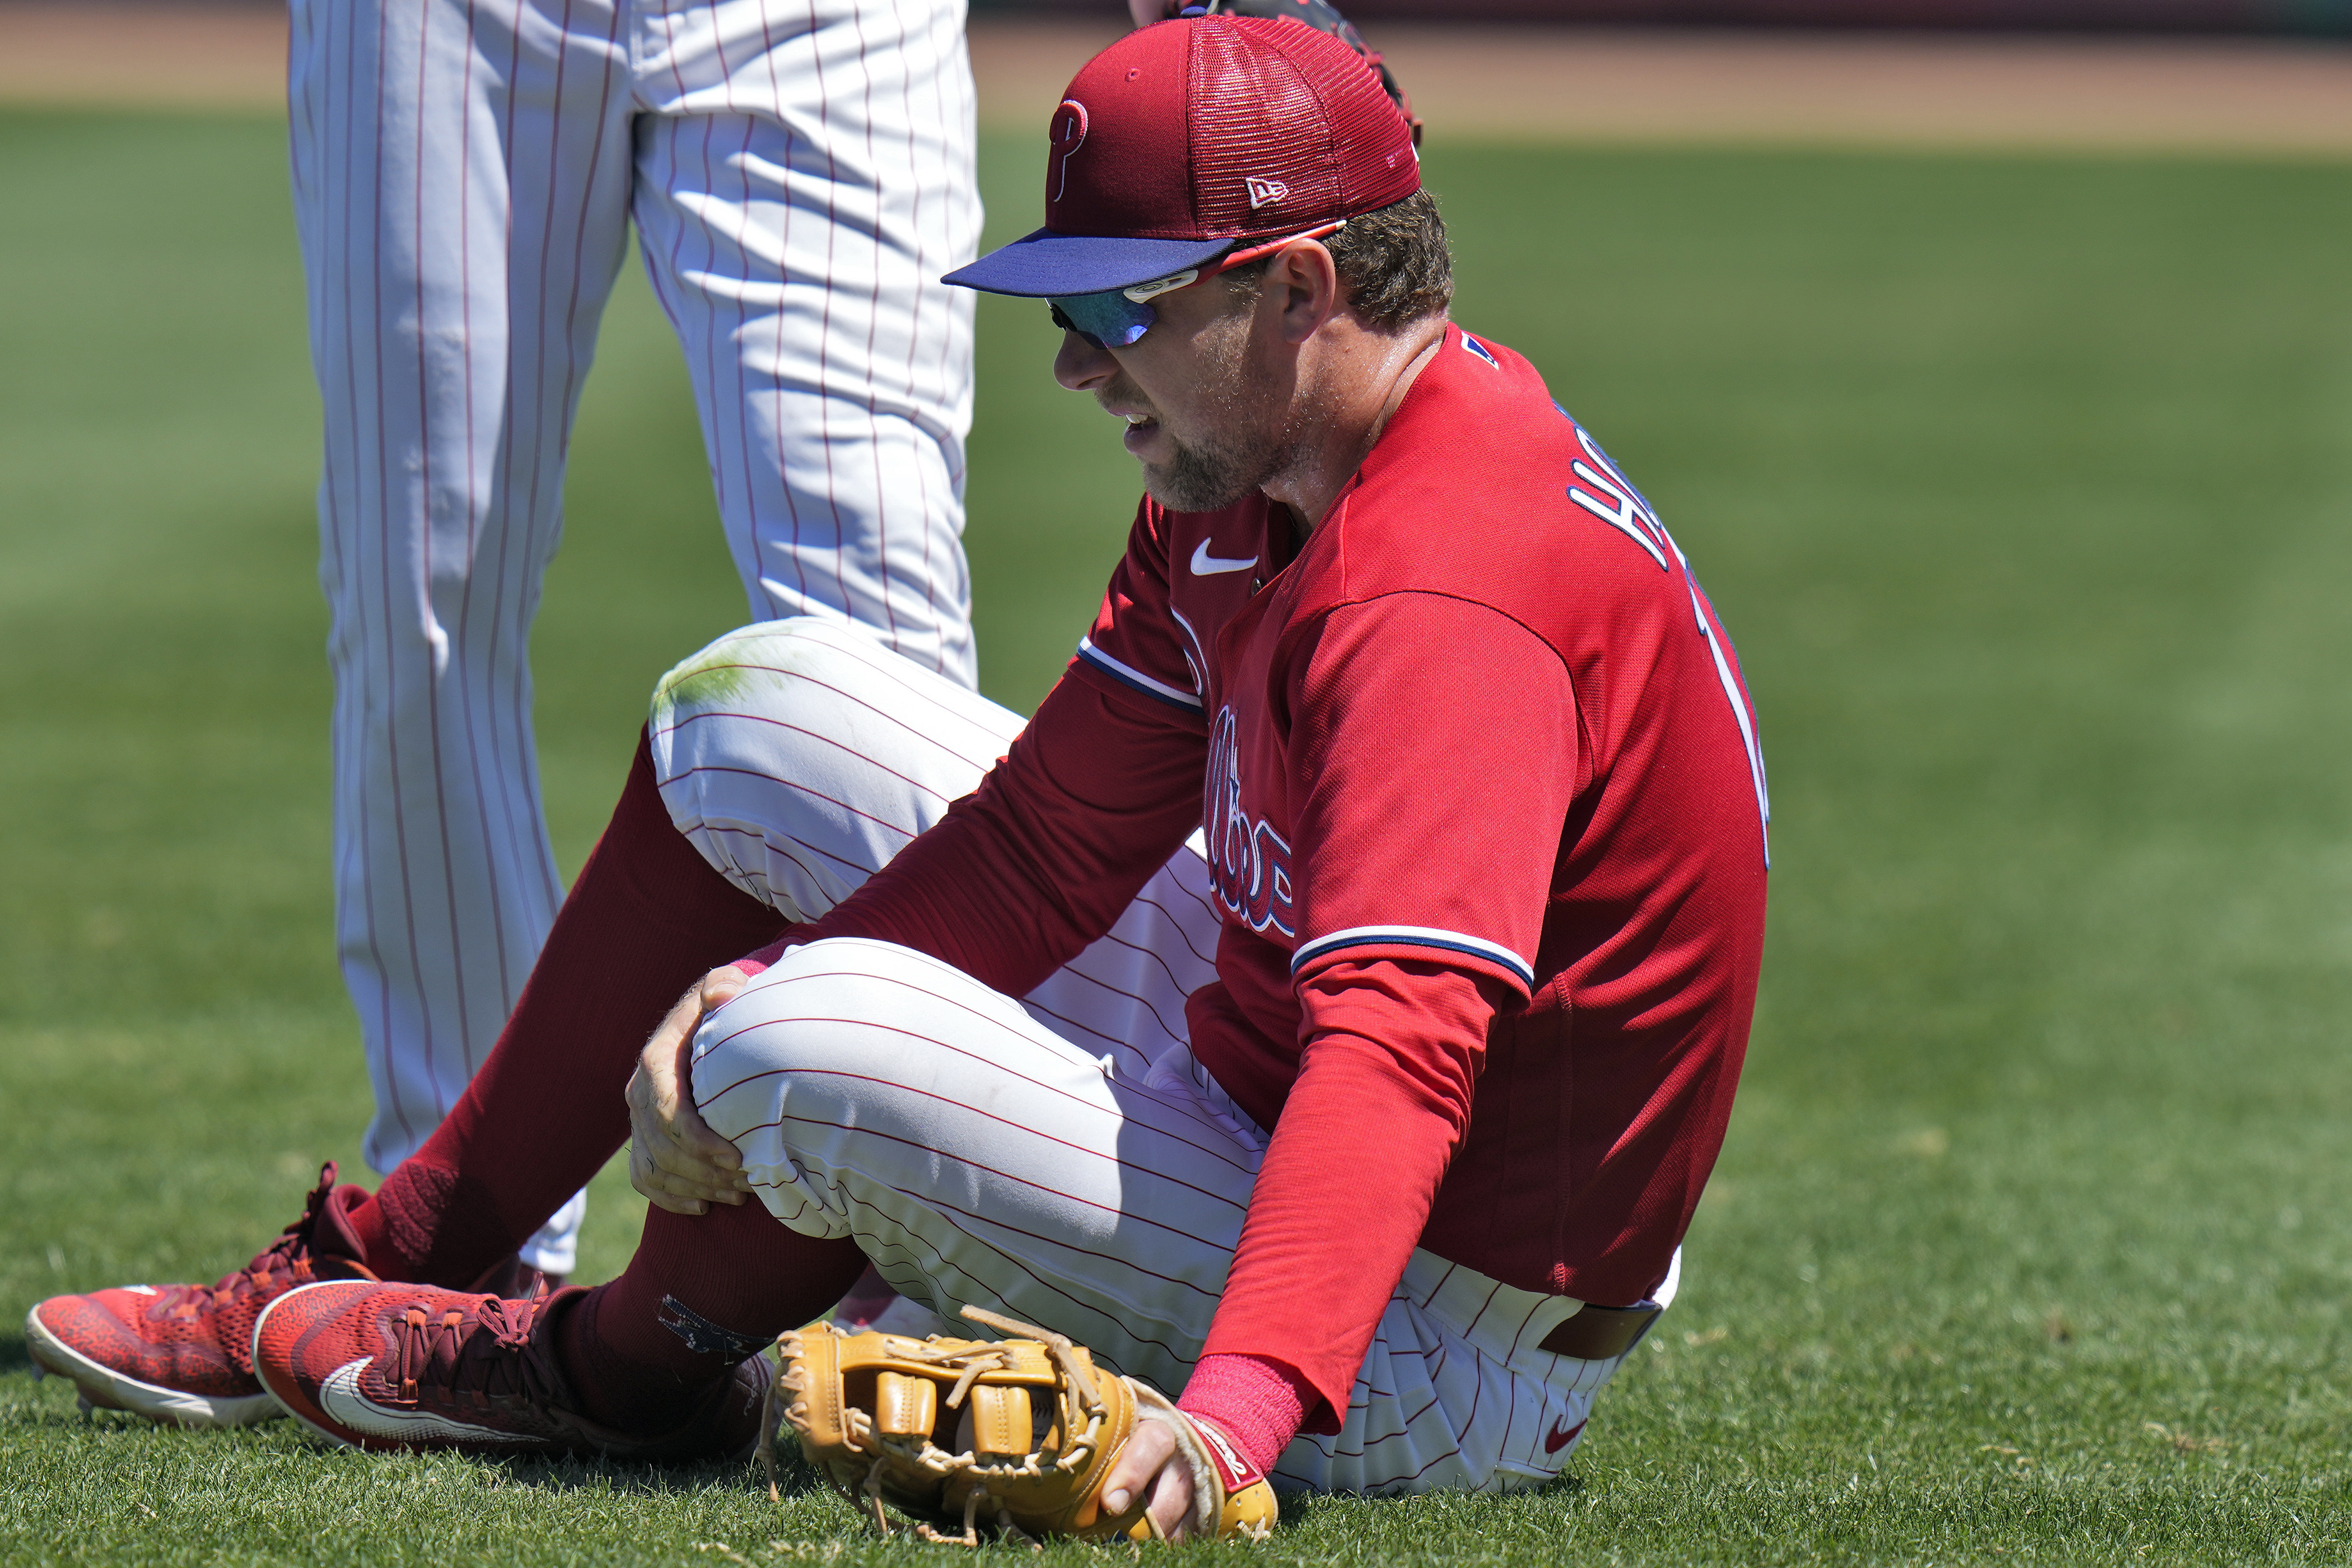 Rhys Hoskins diagnosed with torn ACL